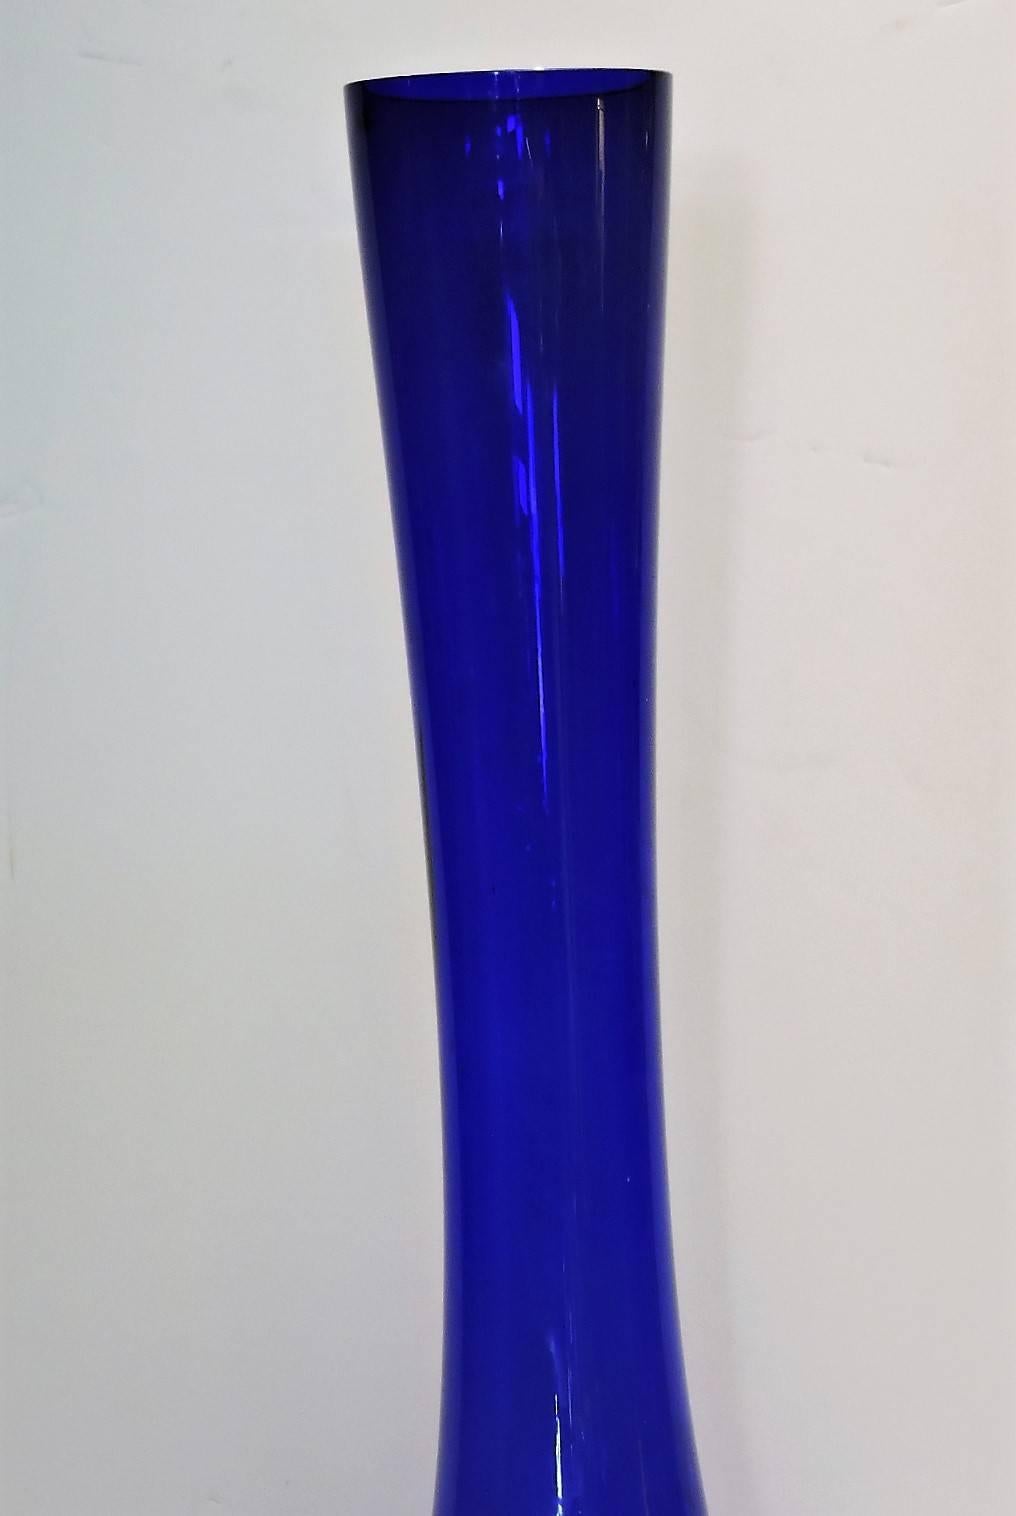 A 31 inch tall and sculptural cobalt blue modernist blown art glass vase, made in Sweden (see - foil label at bottom) - most likely by Arthur Percy dating from 1950-1960.